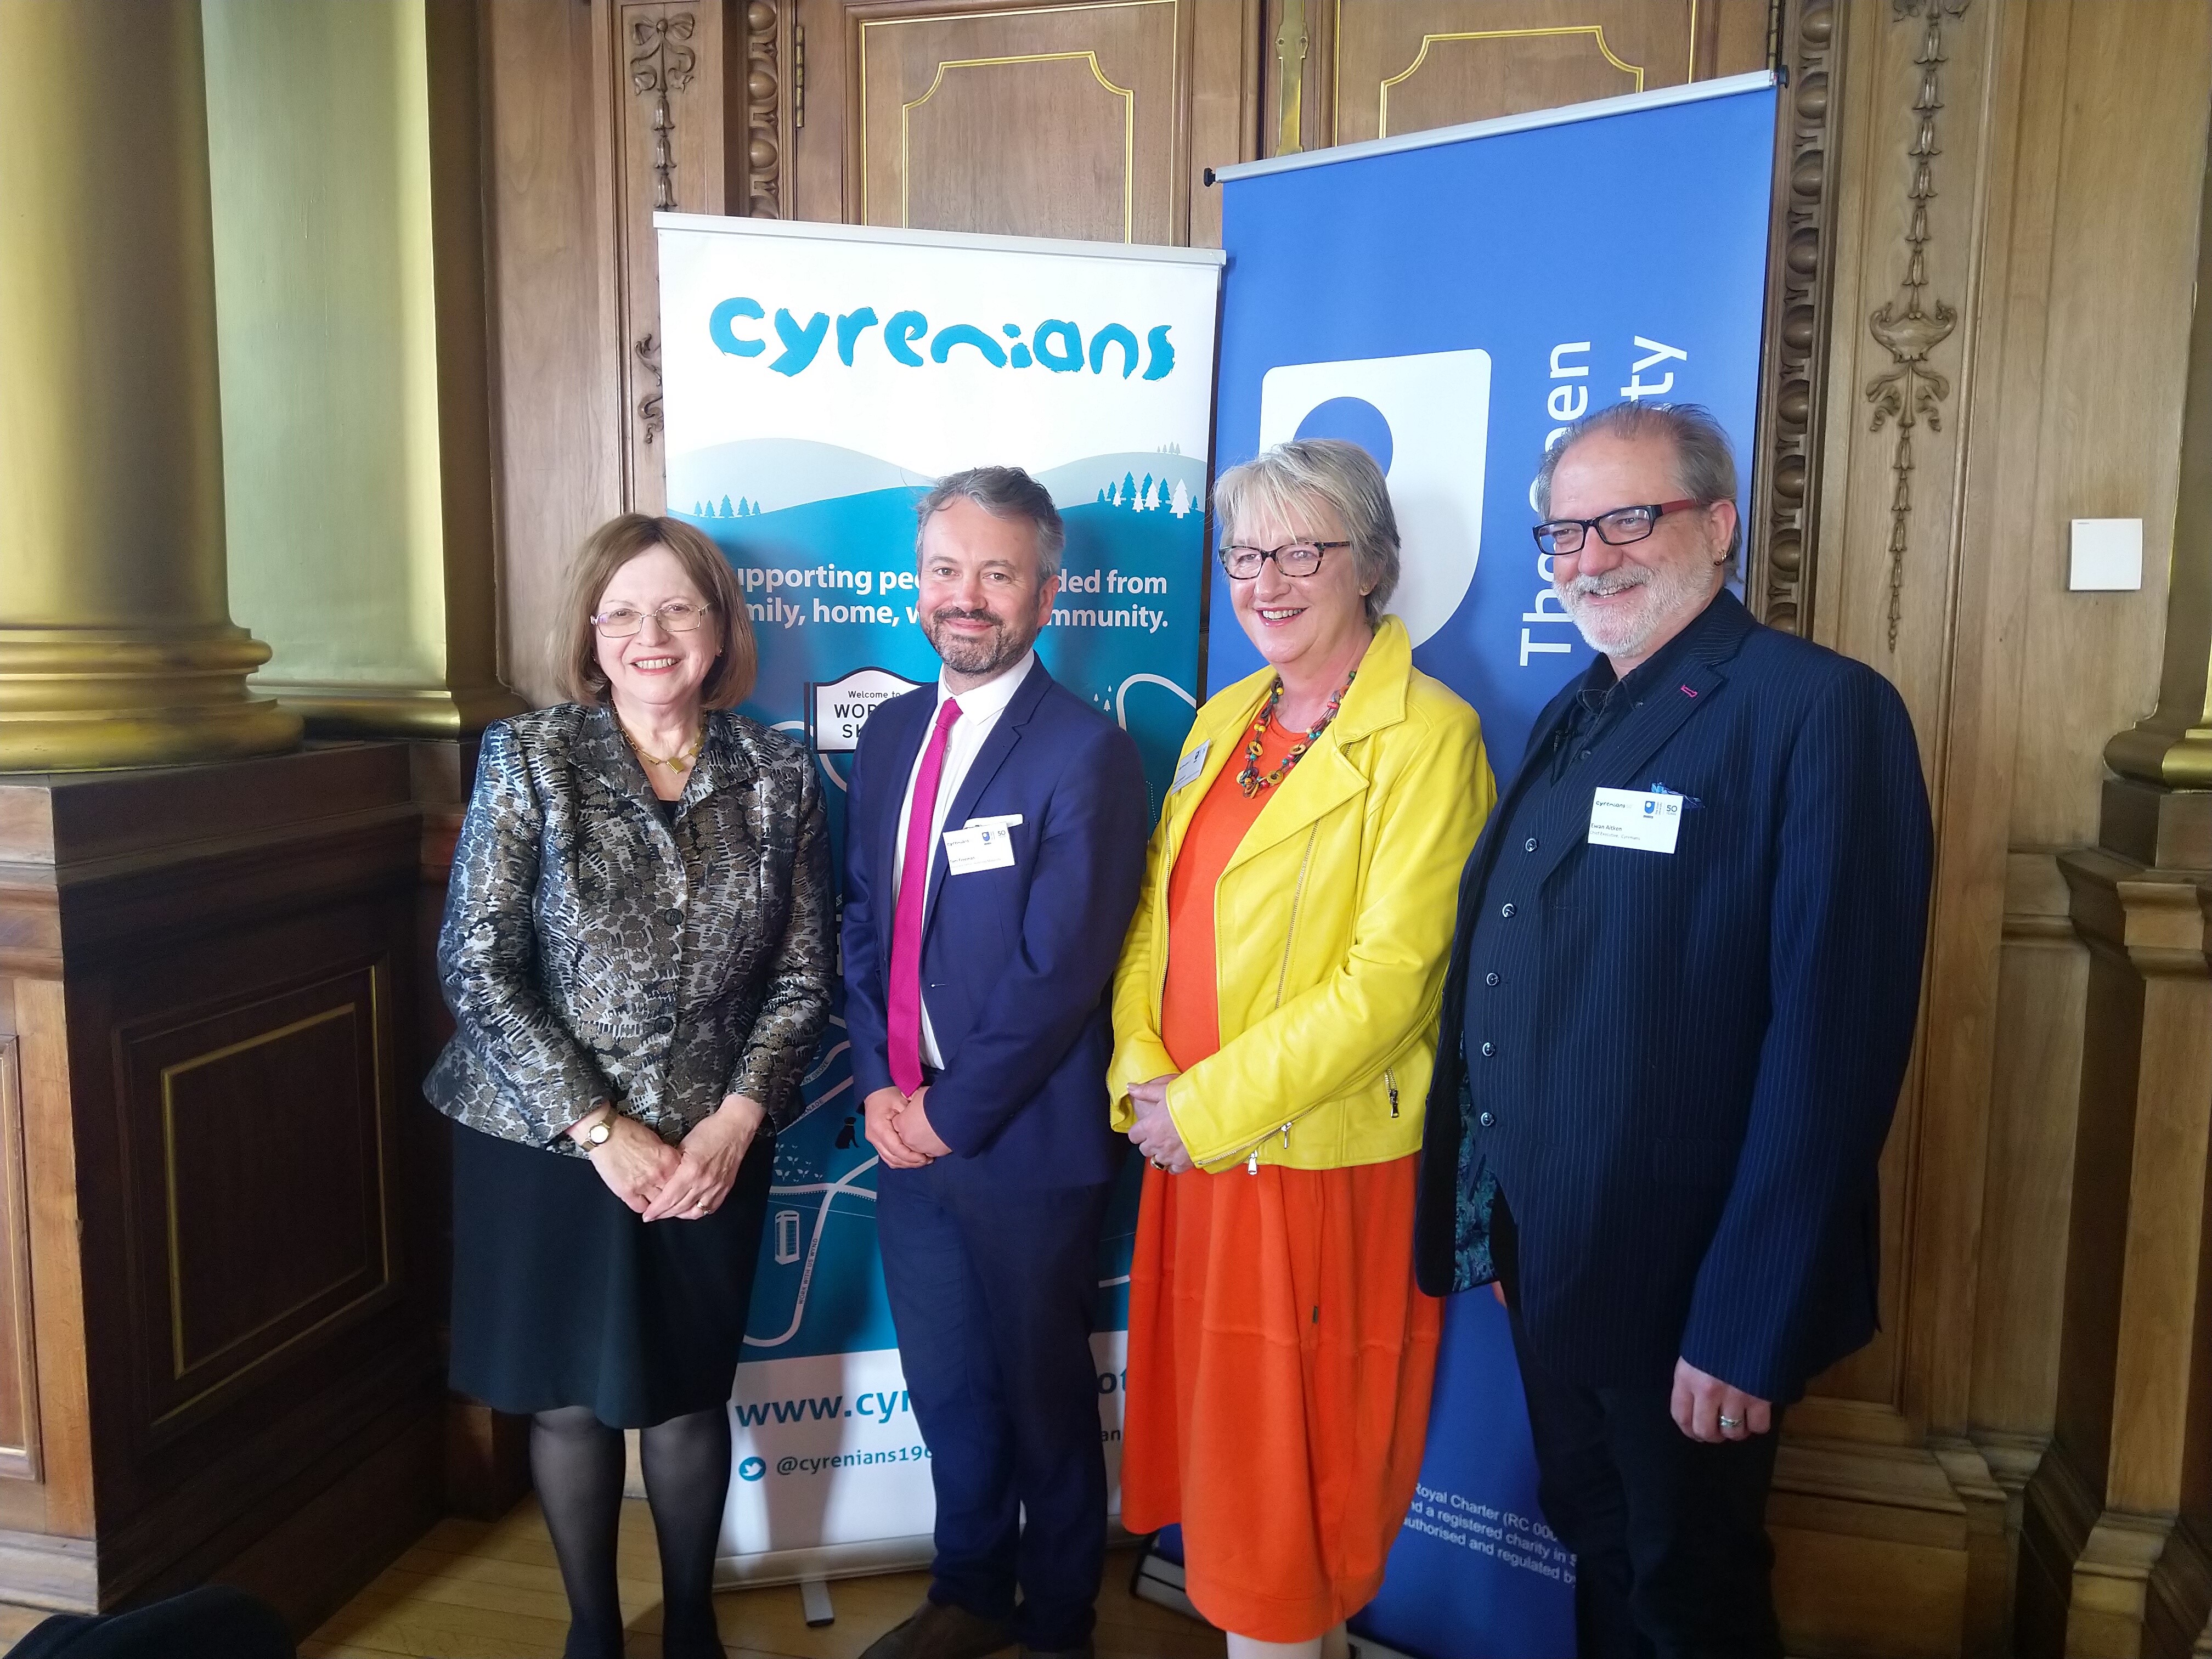 Cyrenians signs learning partnership deal with Open University